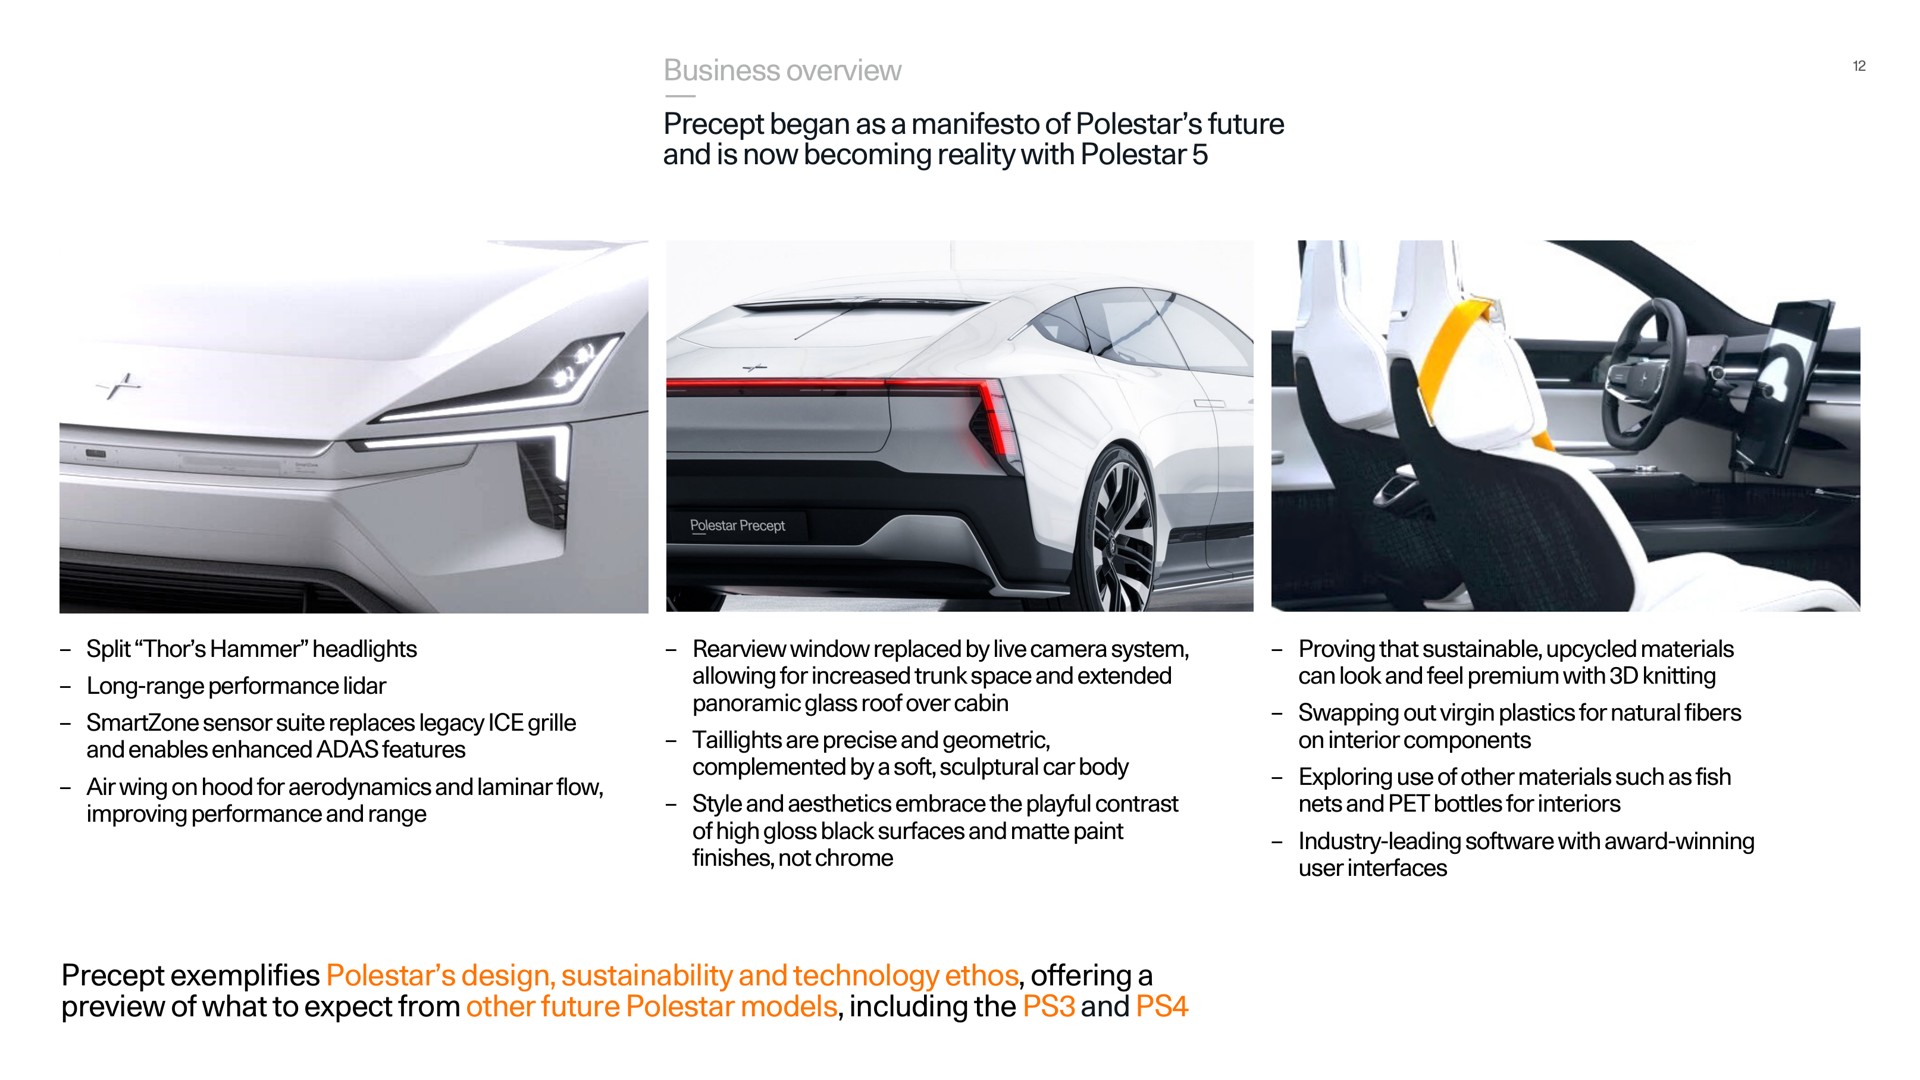 business overview precept began as a manifesto of polestar future and is now becoming reality with polestar precept exemplifies polestar design and technology ethos offering a preview of what to expect from other future polestar models including the and | Polestar